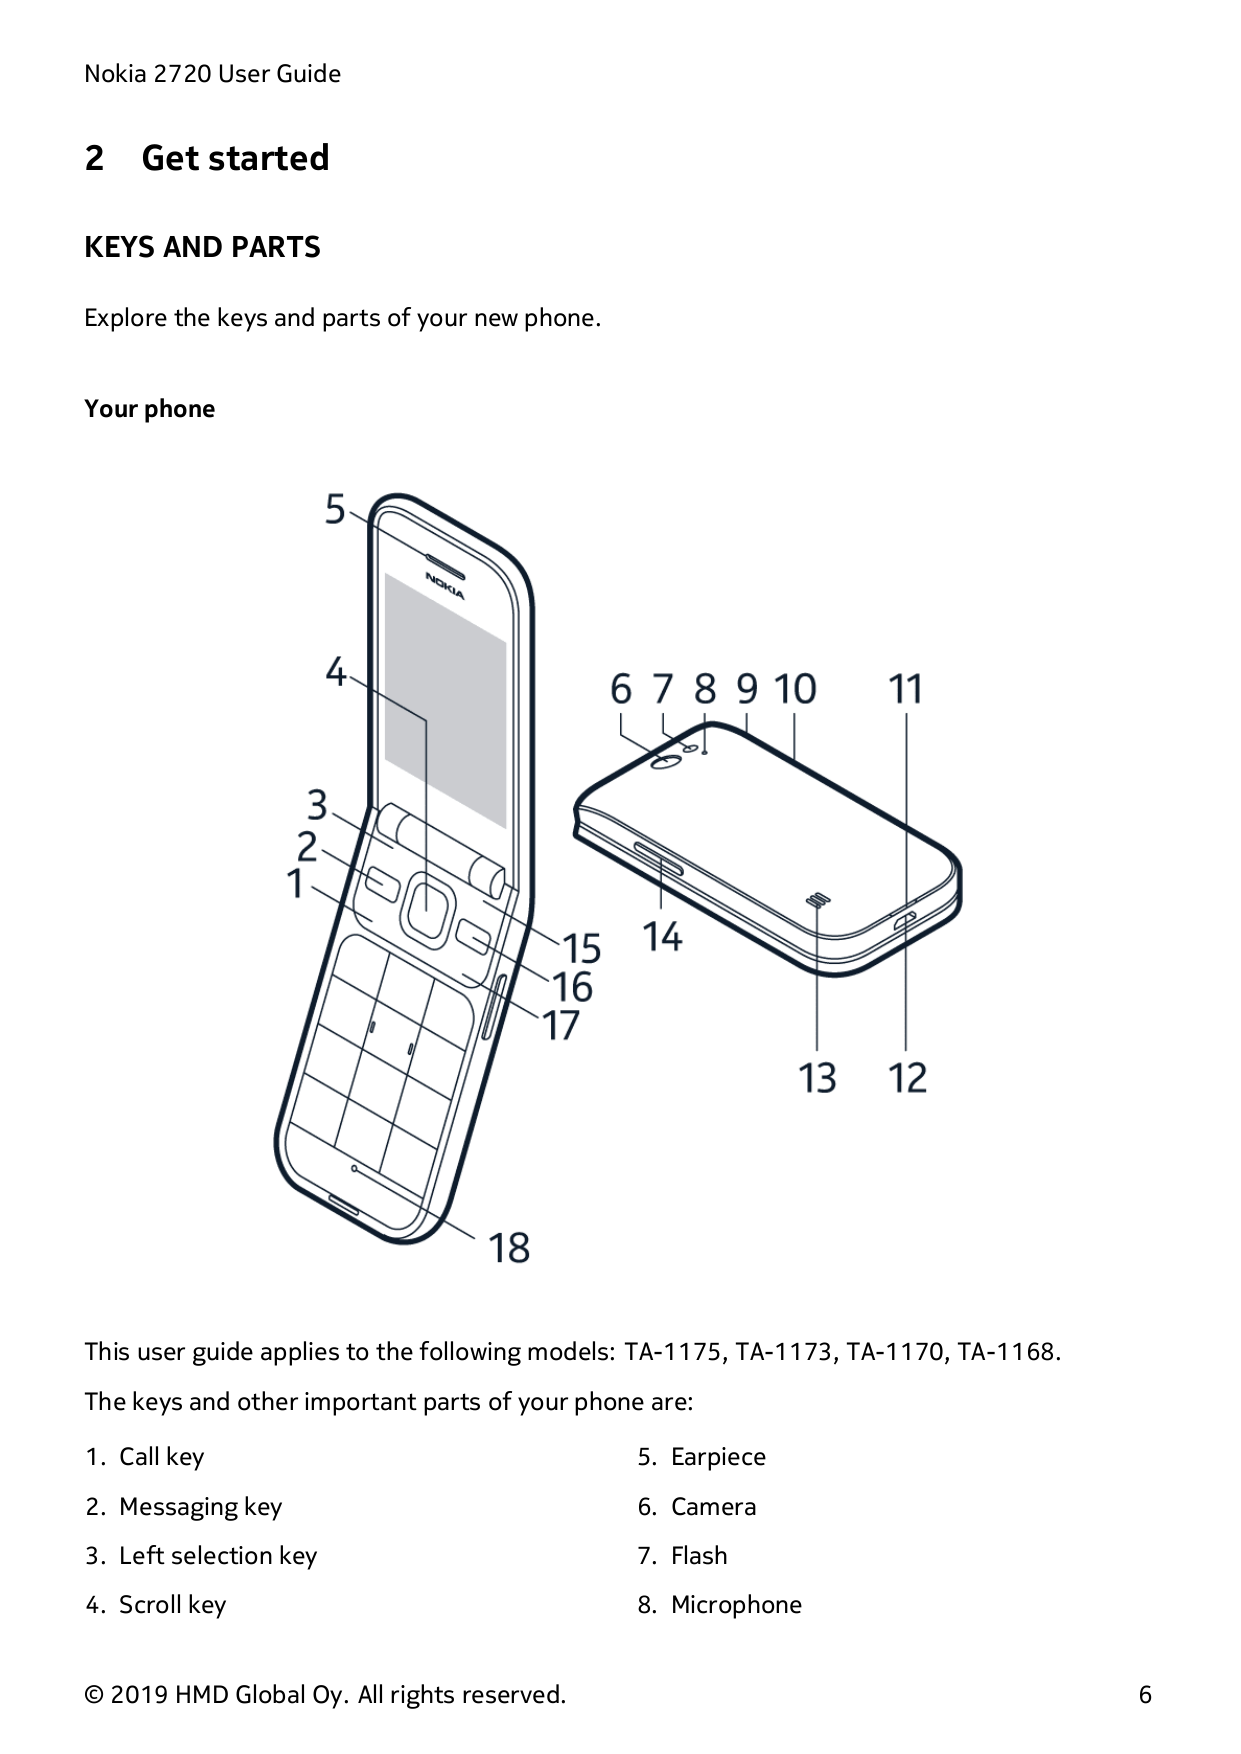 Nokia 2720 User Guide2Get startedKEYS AND PARTSExplore the keys and parts of your new phone.Your phoneThis user guide applies to